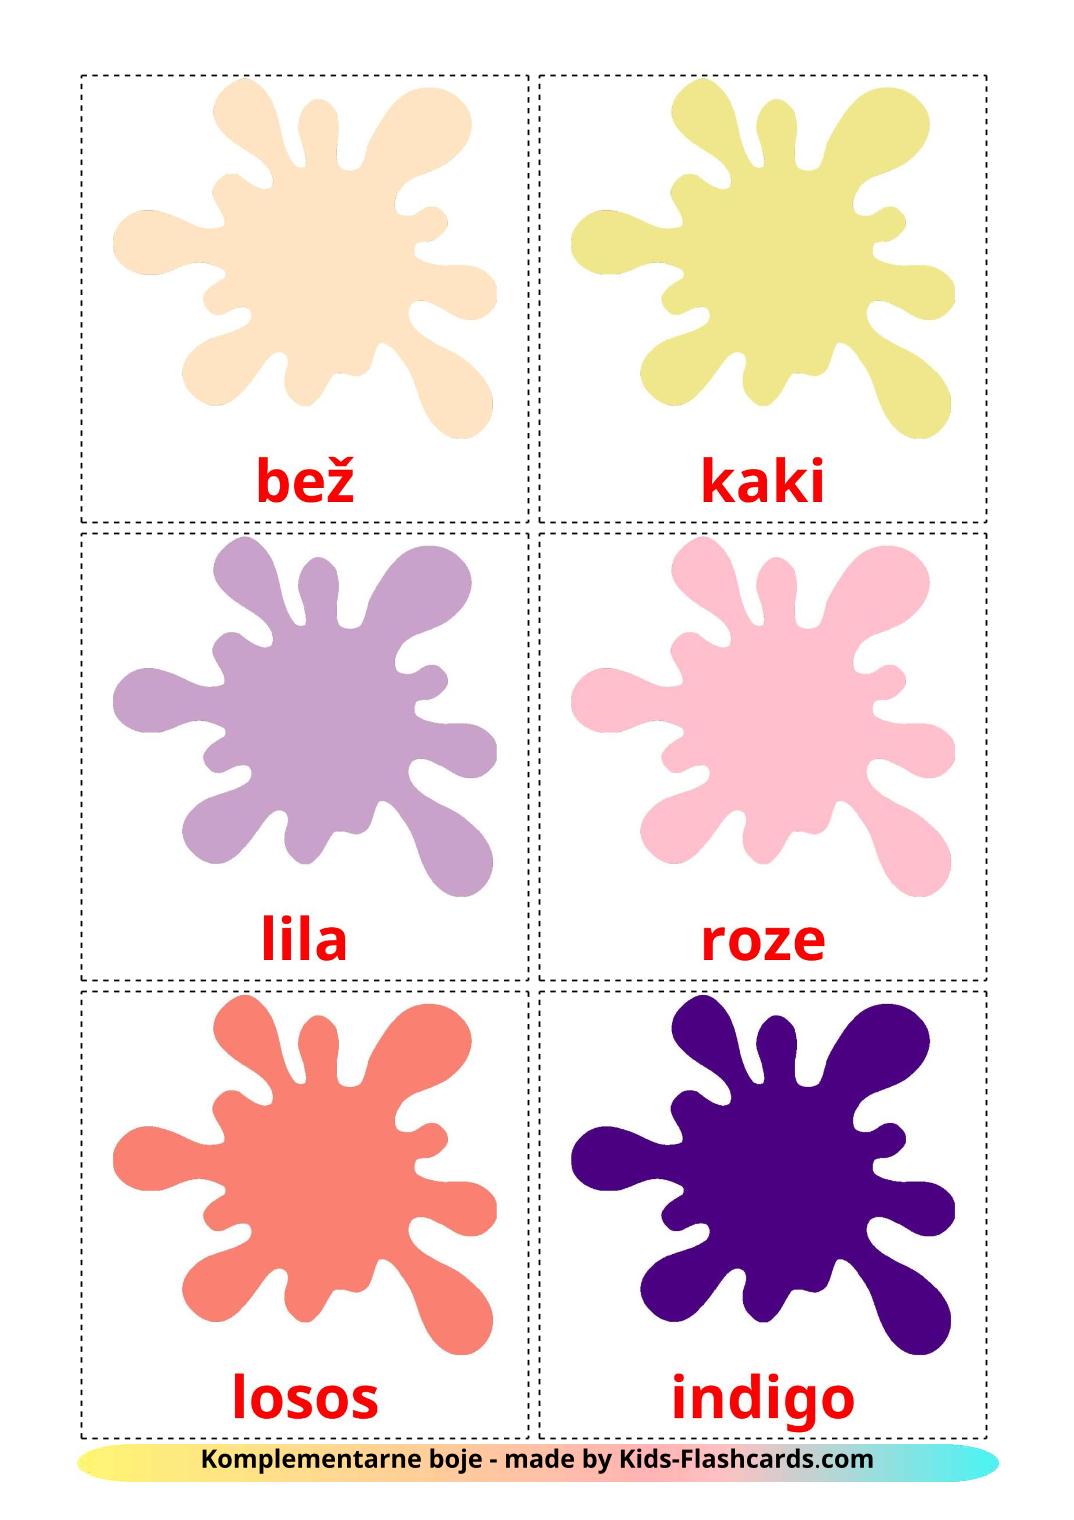 Secondary colors - 20 Free Printable serbian Flashcards 